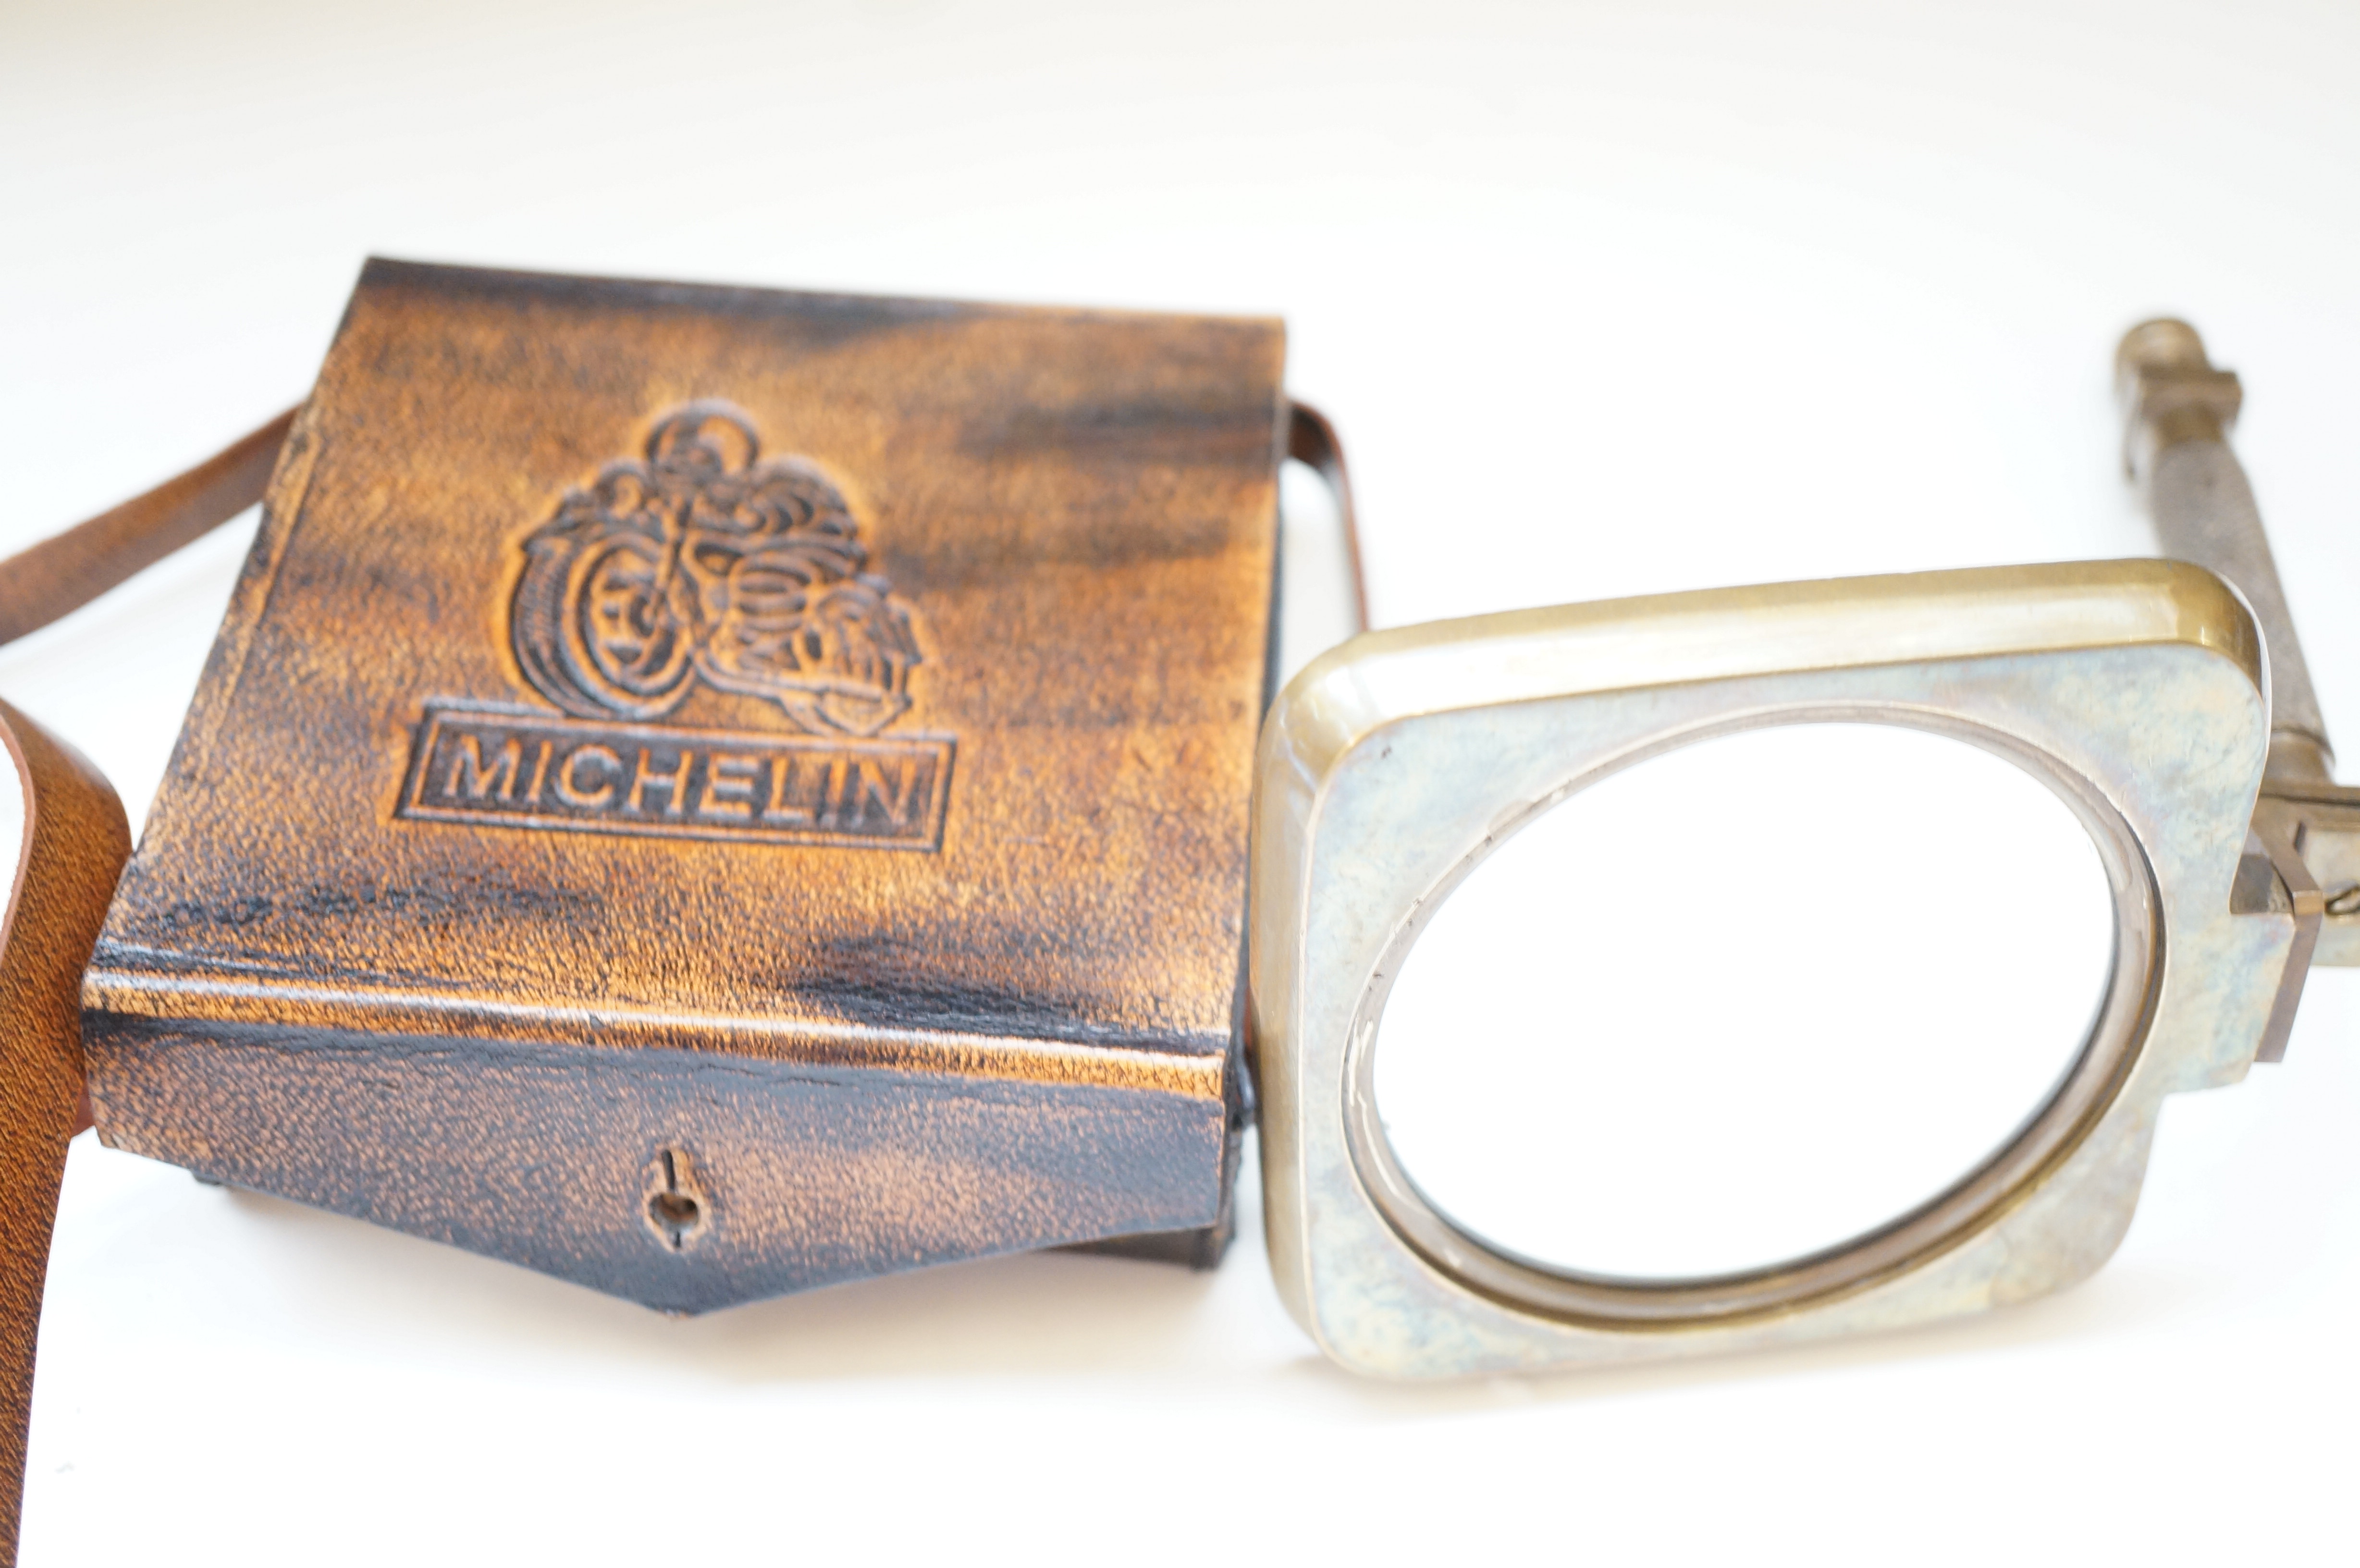 Brass Michelin magnifying glass in leather case